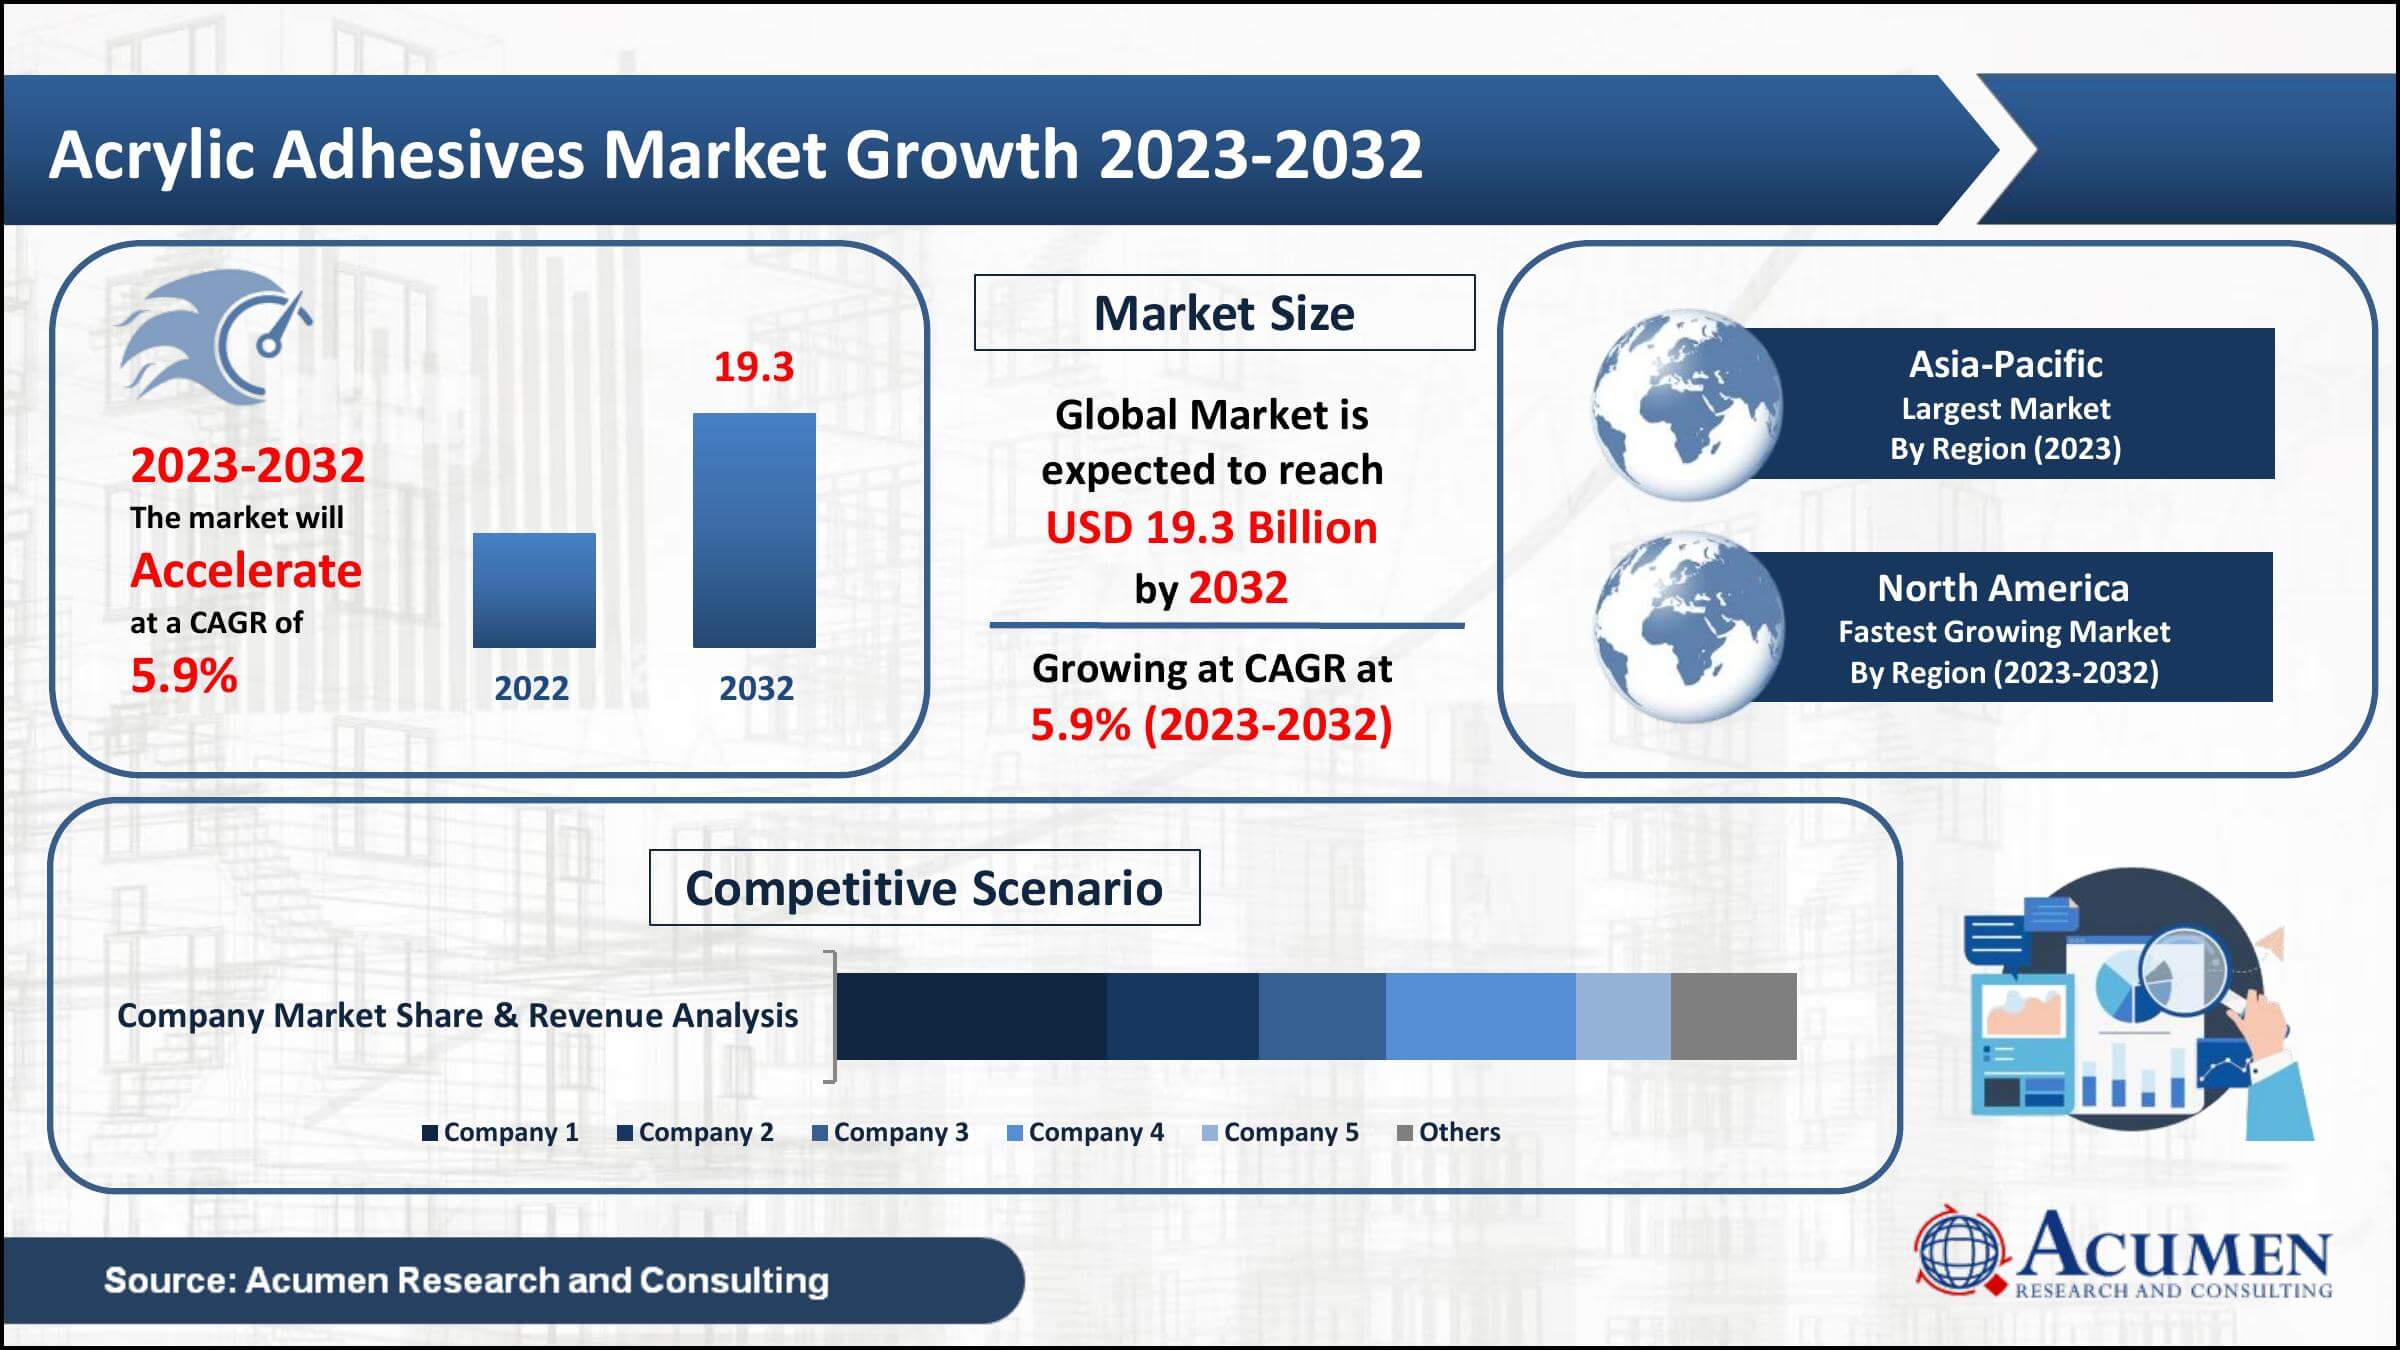 Global acrylic adhesives market value was worth USD 11.1 Billion in 2022, with a 5.9% CAGR from 2023 to 2032